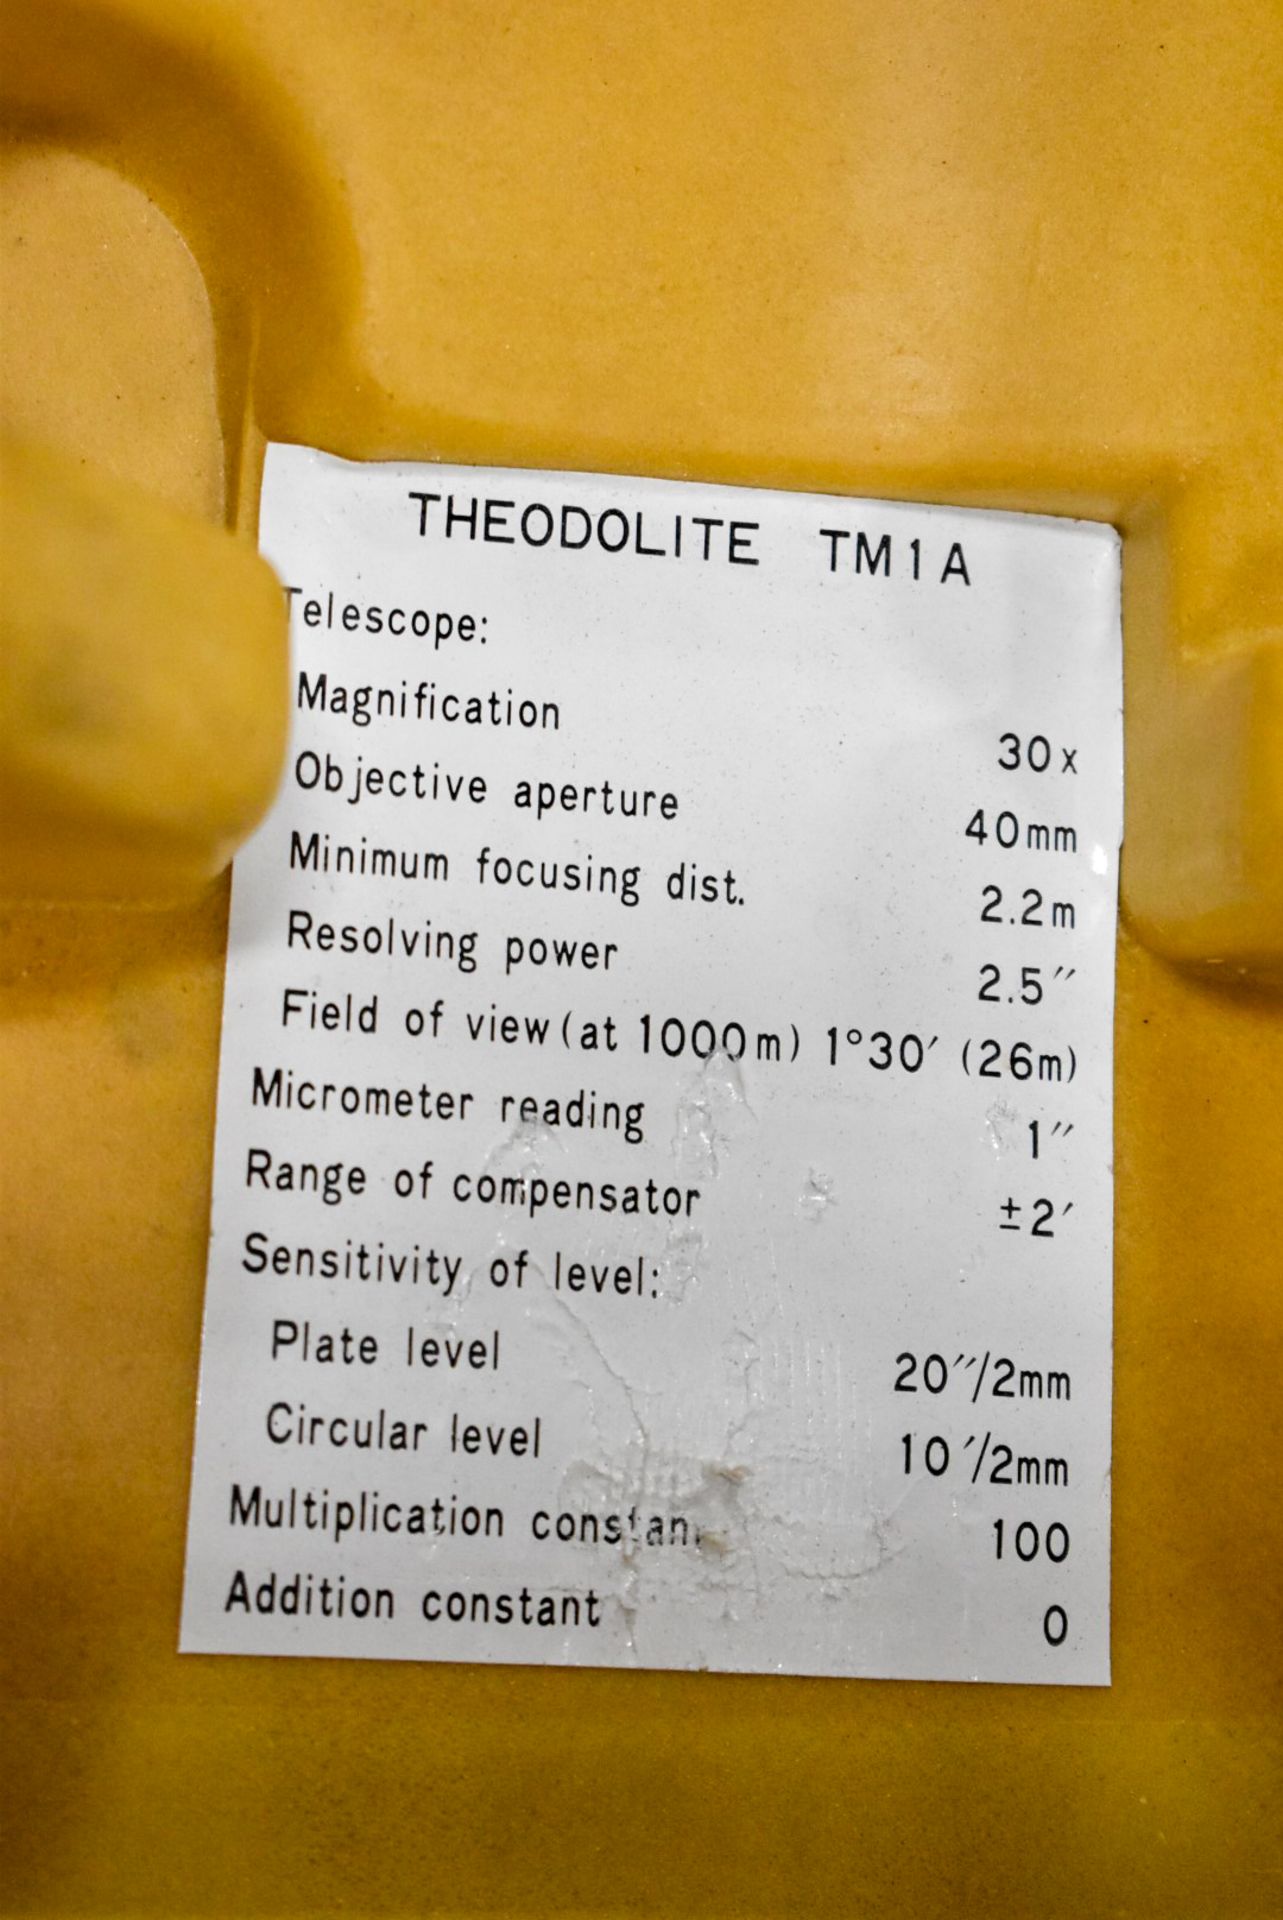 LIETZ THEODOLITE TM1A TELESCOPE TRANSIT WITH 30X MAGNIFICATION CAPACITY, 40MM OBJECTIVE APERTURE, - Image 8 of 8